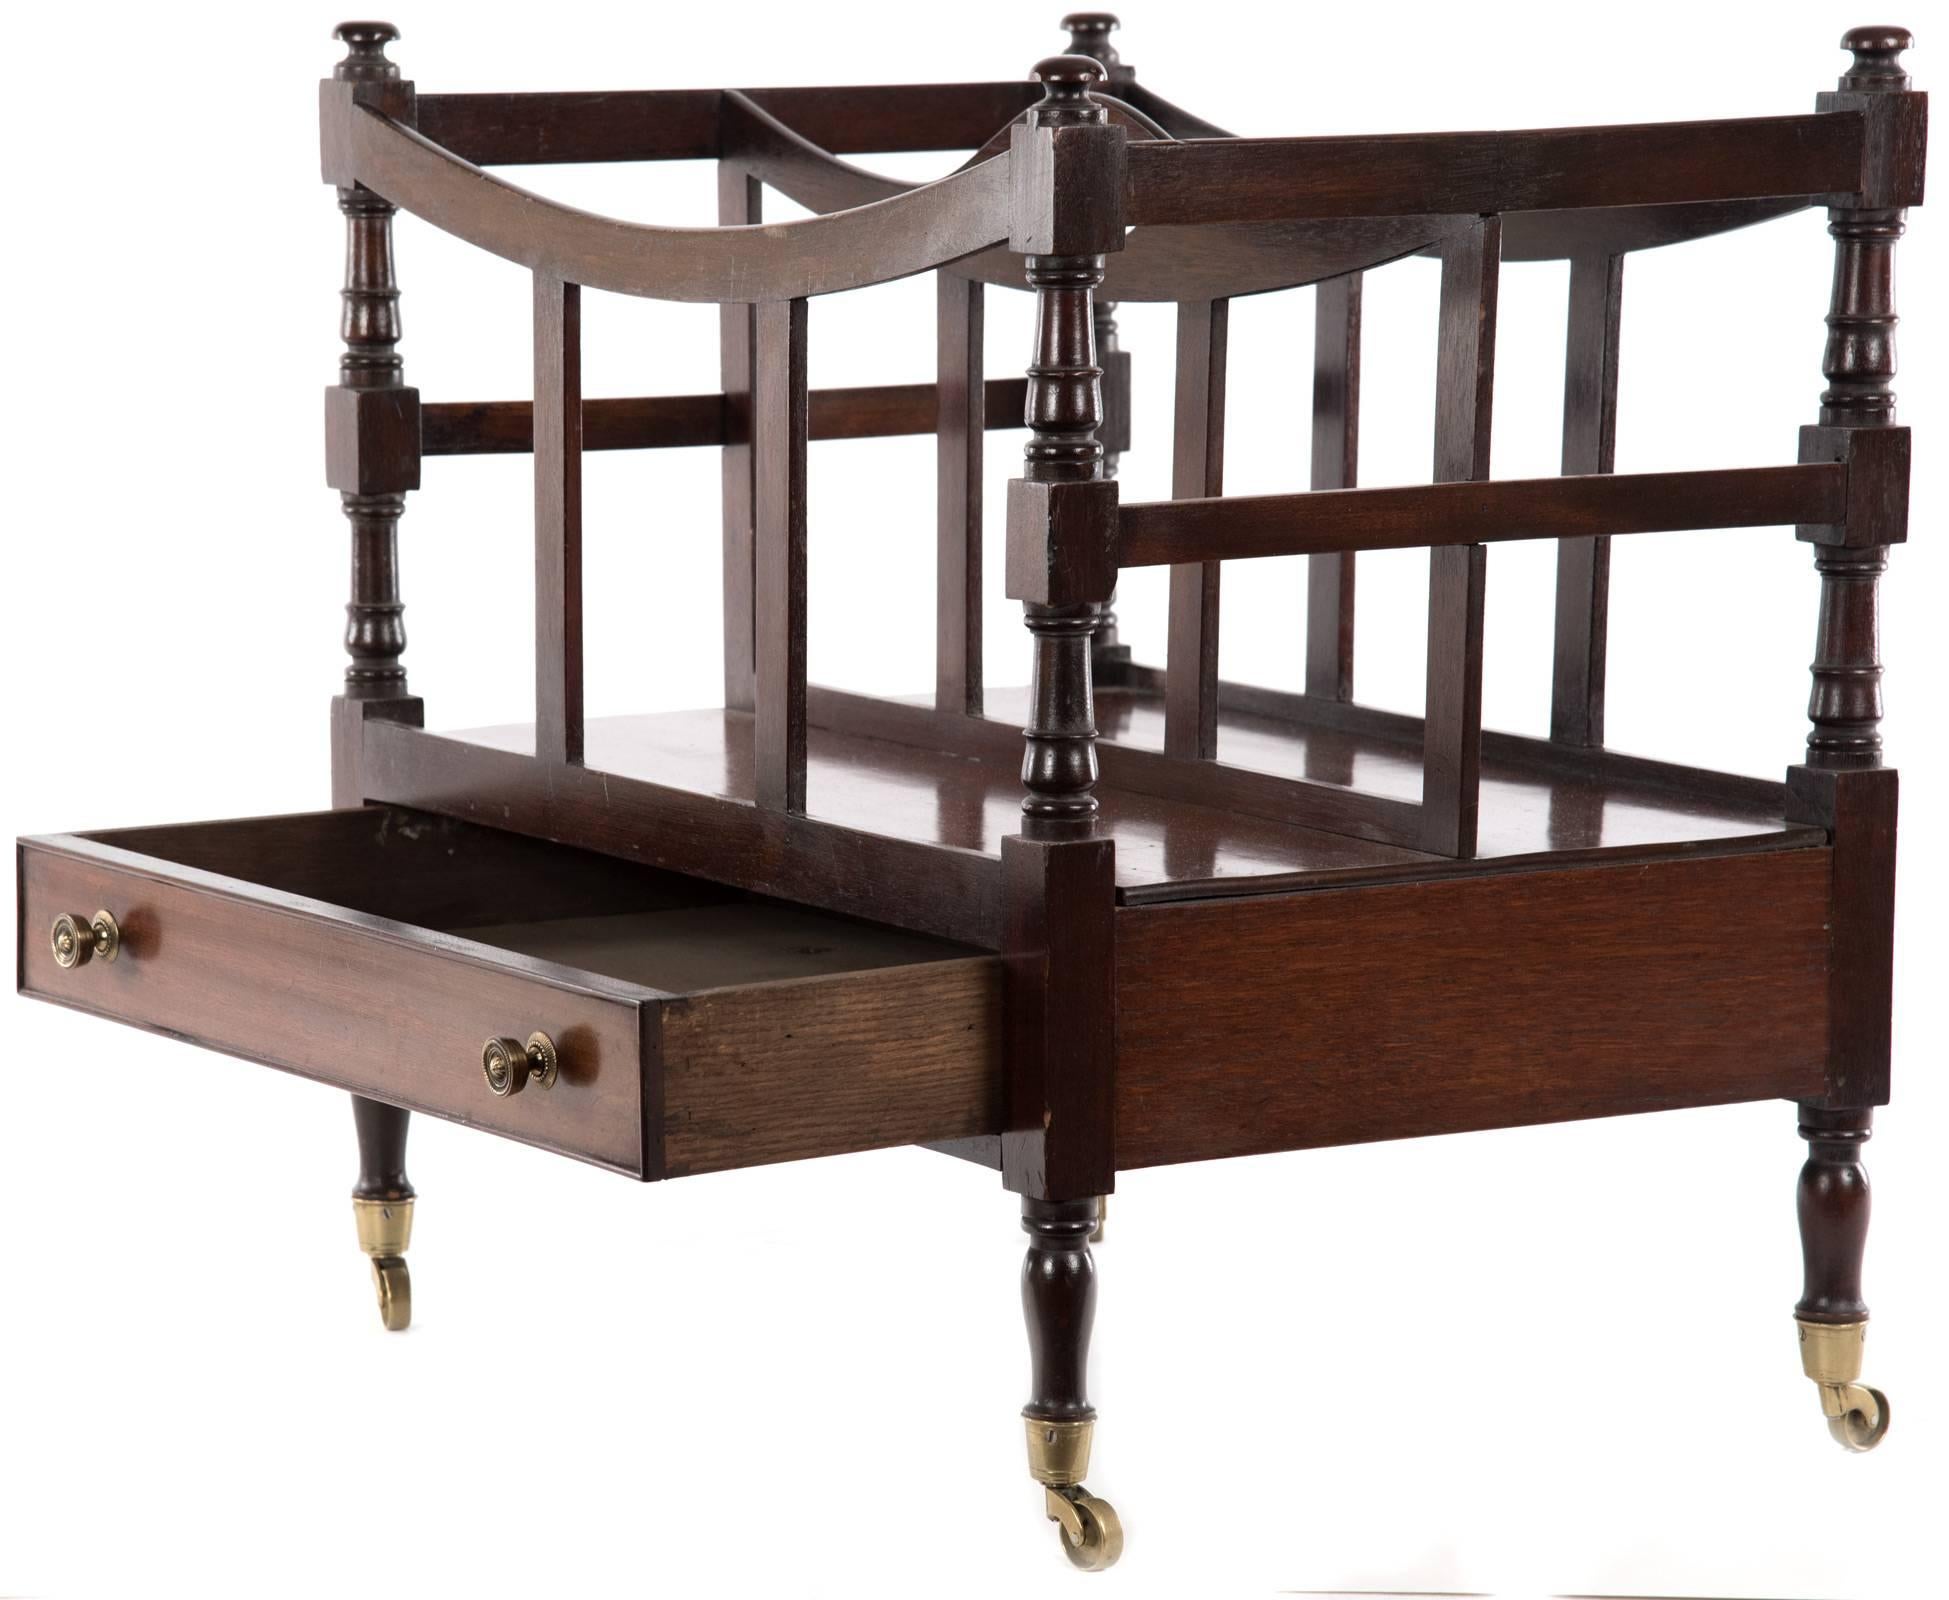 A 19th century Regency period zebrawood canterbury of boat shaped form having pierced carrying handle and turned upright supports, above one drawer of dovetail construction with brass pulls and raised on elegantly turned short legs that terminate in